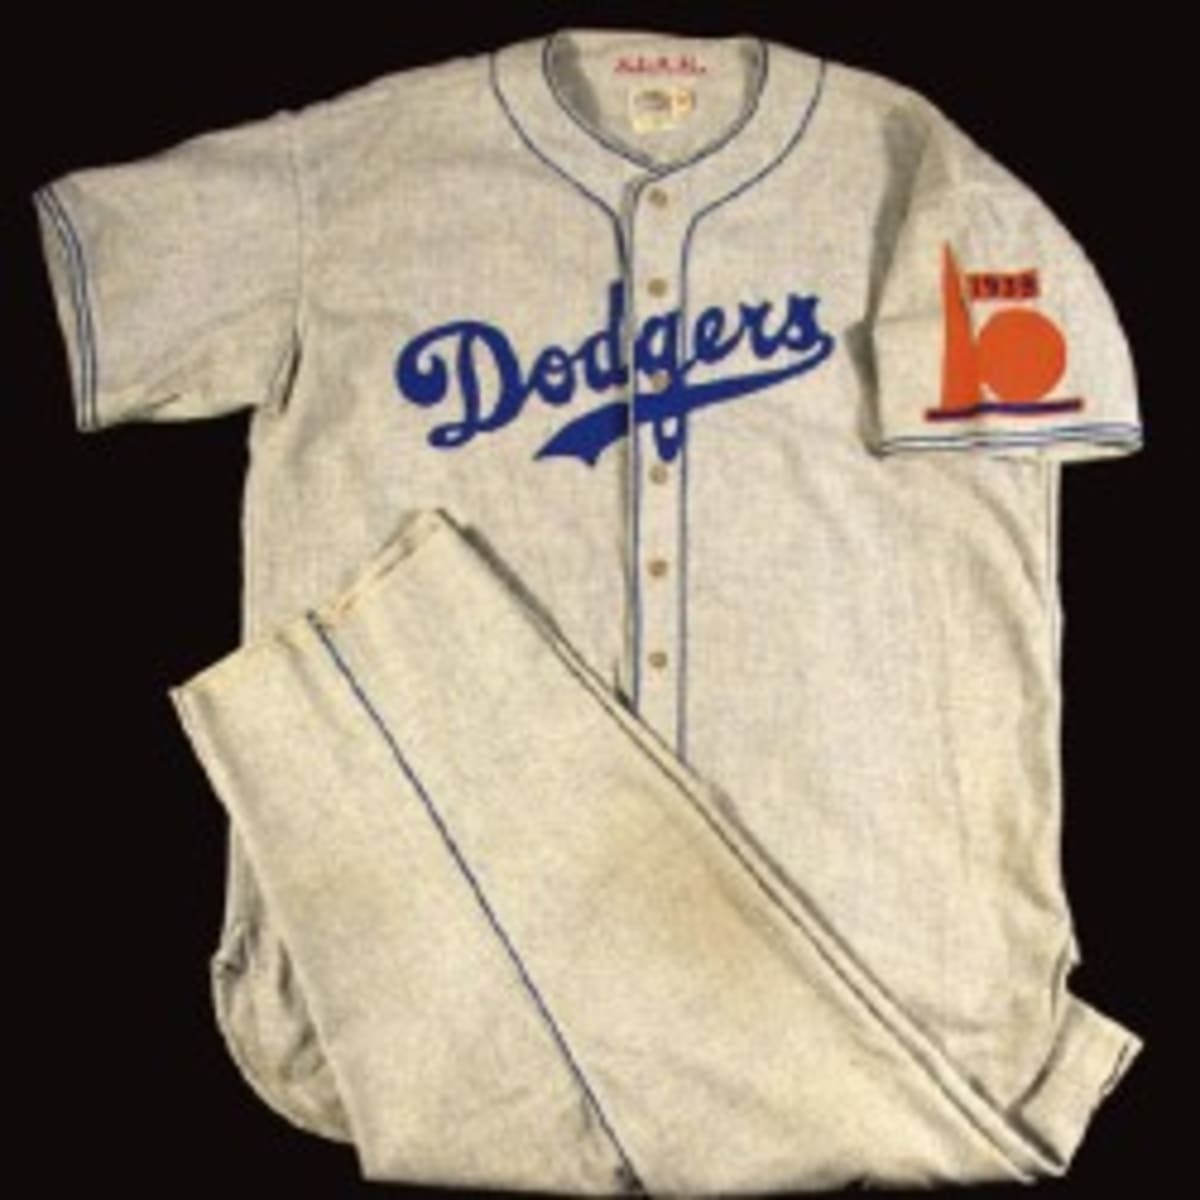 Babe Ruth's Dodgers Coaching Uniform Could Fetch Up to